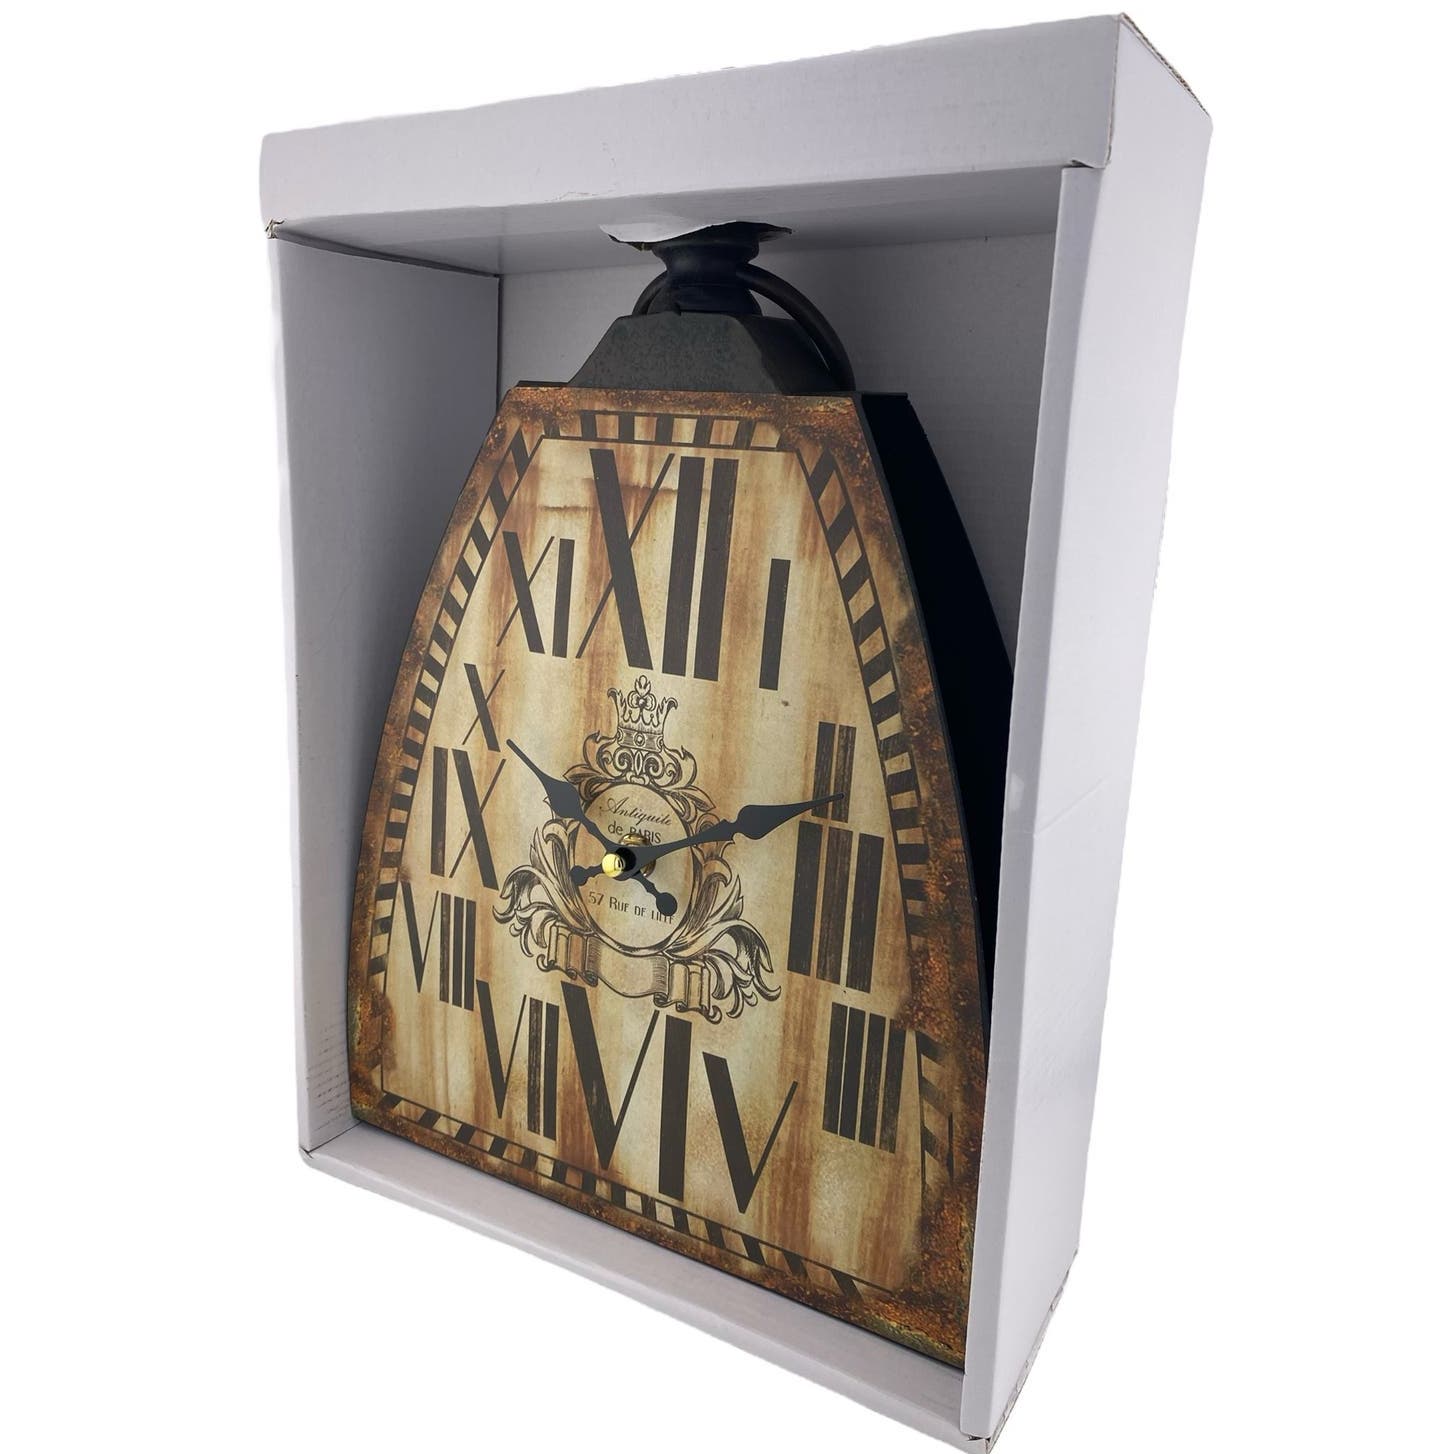 Kettle Bell Clock Shed Collection Brown Metal Wall Mantel Desk Shelf 9x12.7" NEW